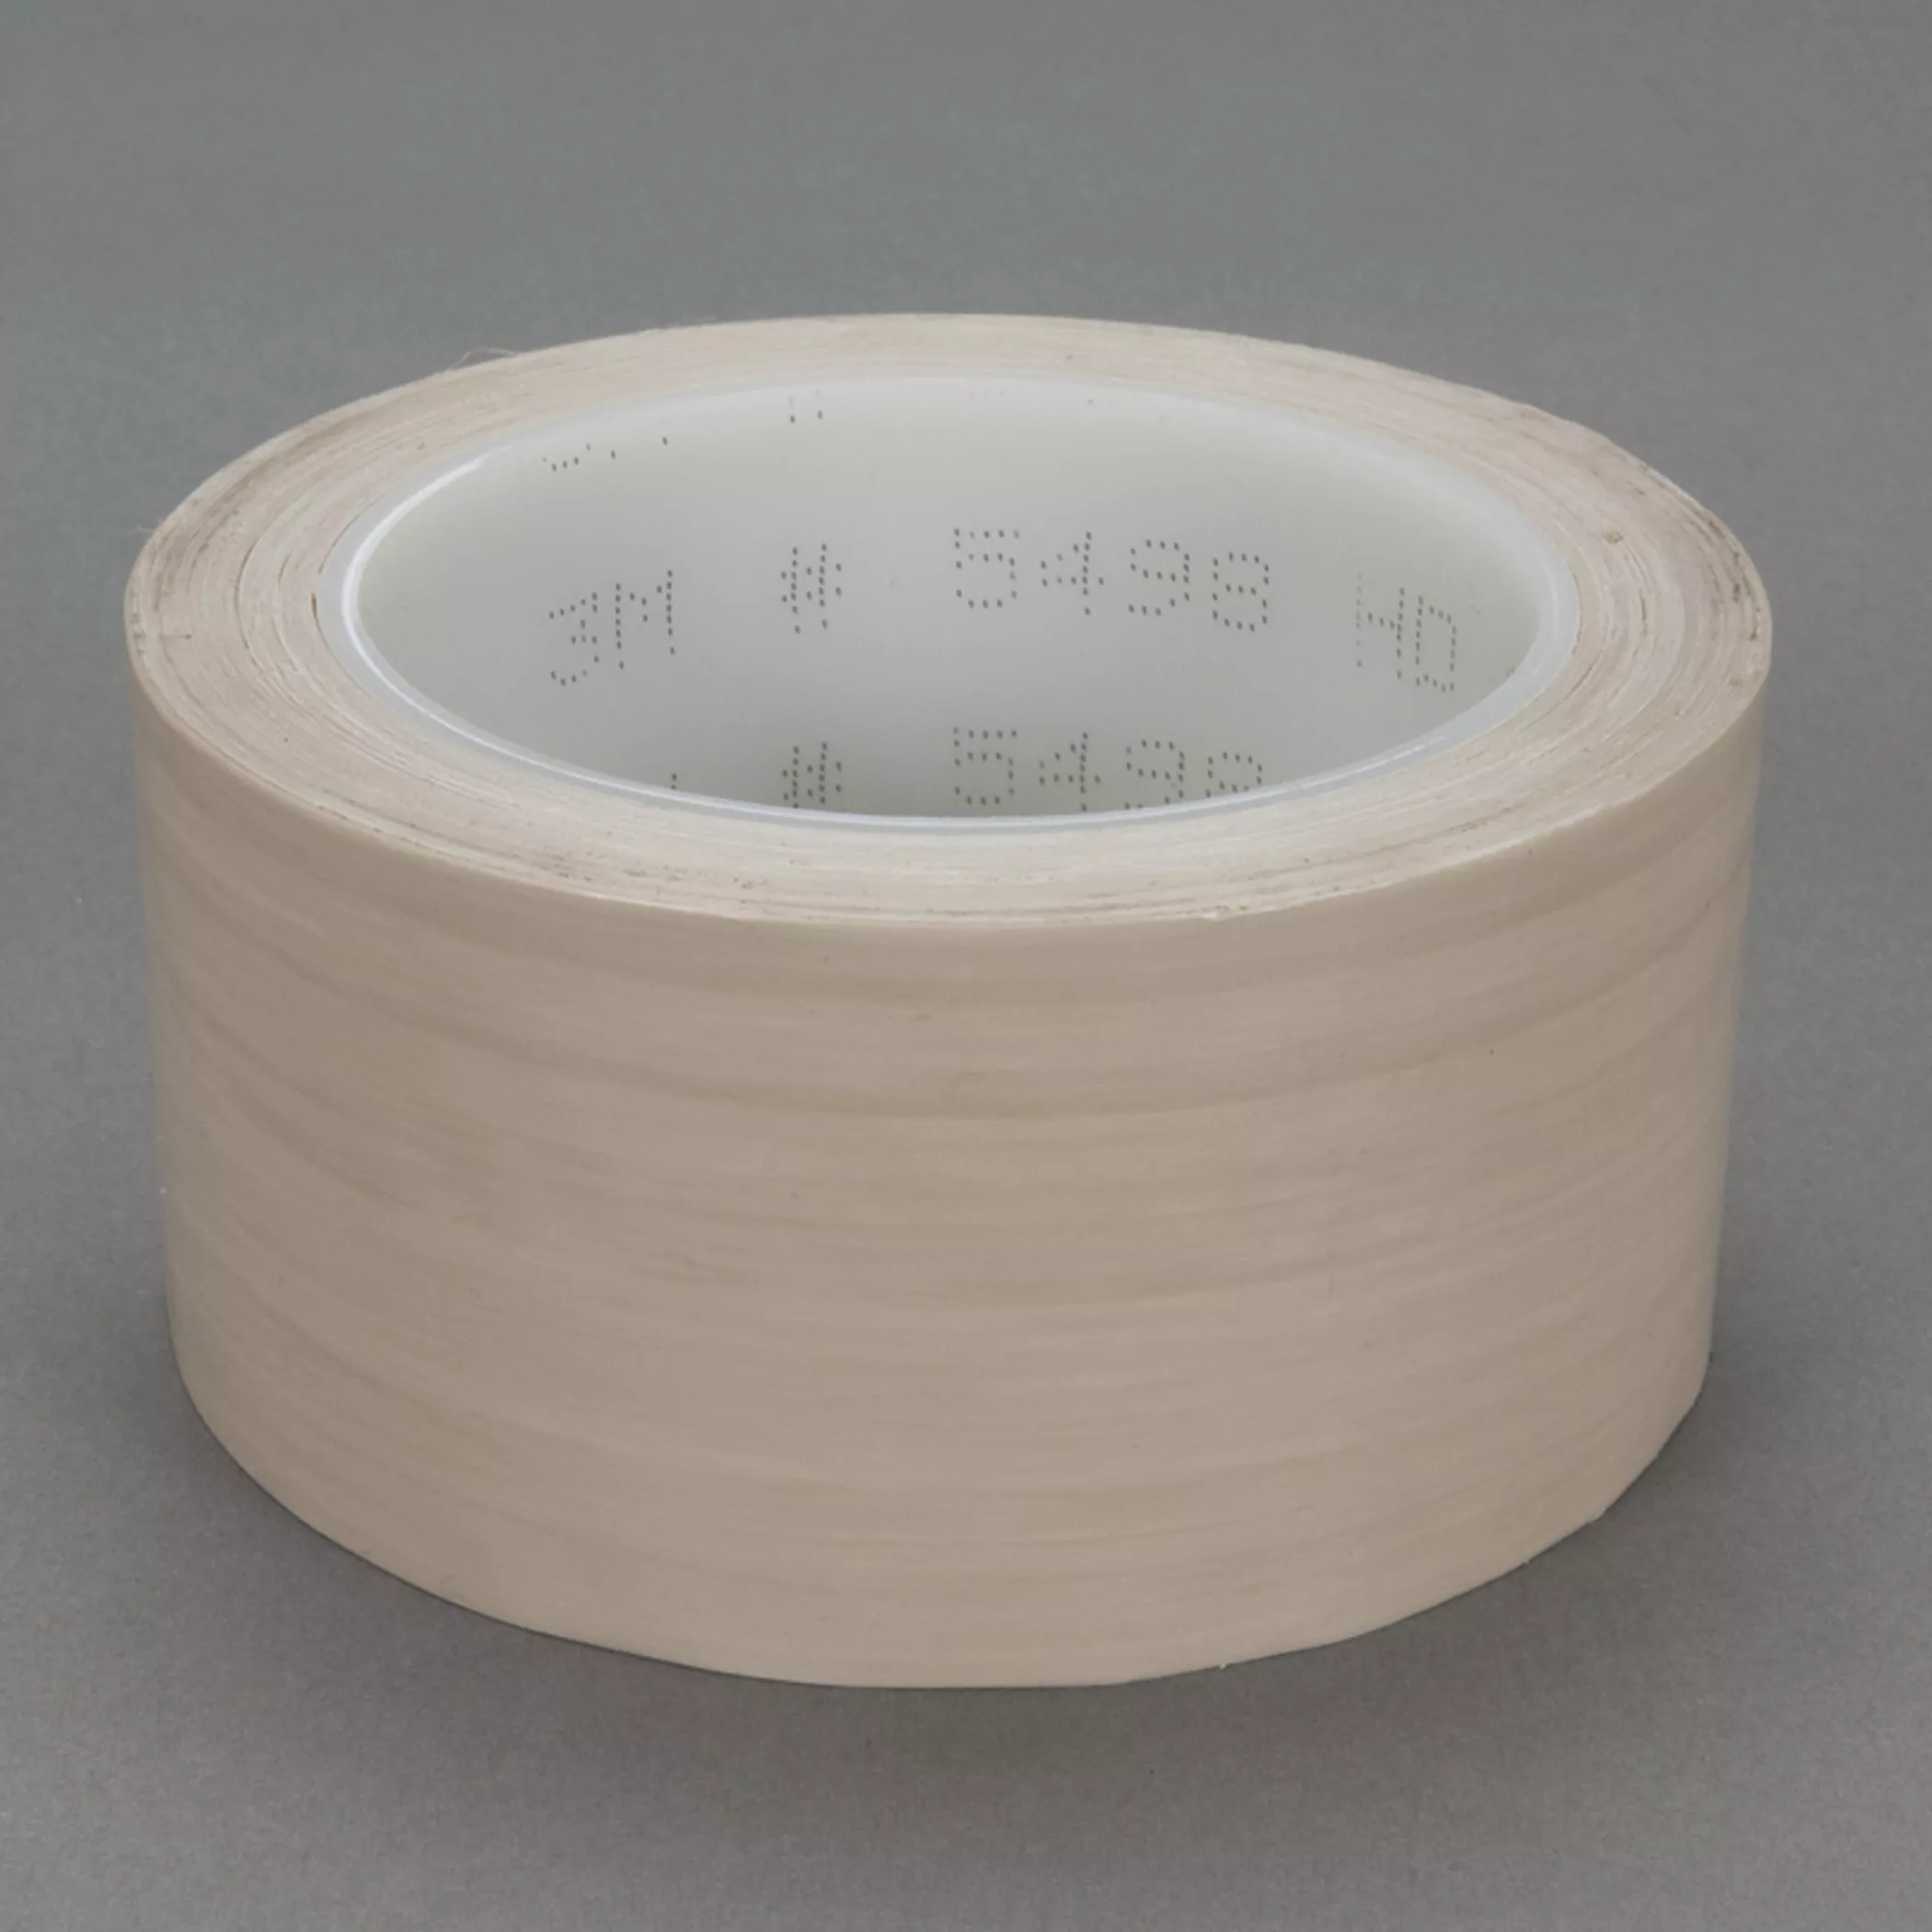 Product Number 5498 | 3M™ PTFE Film Tape 5498